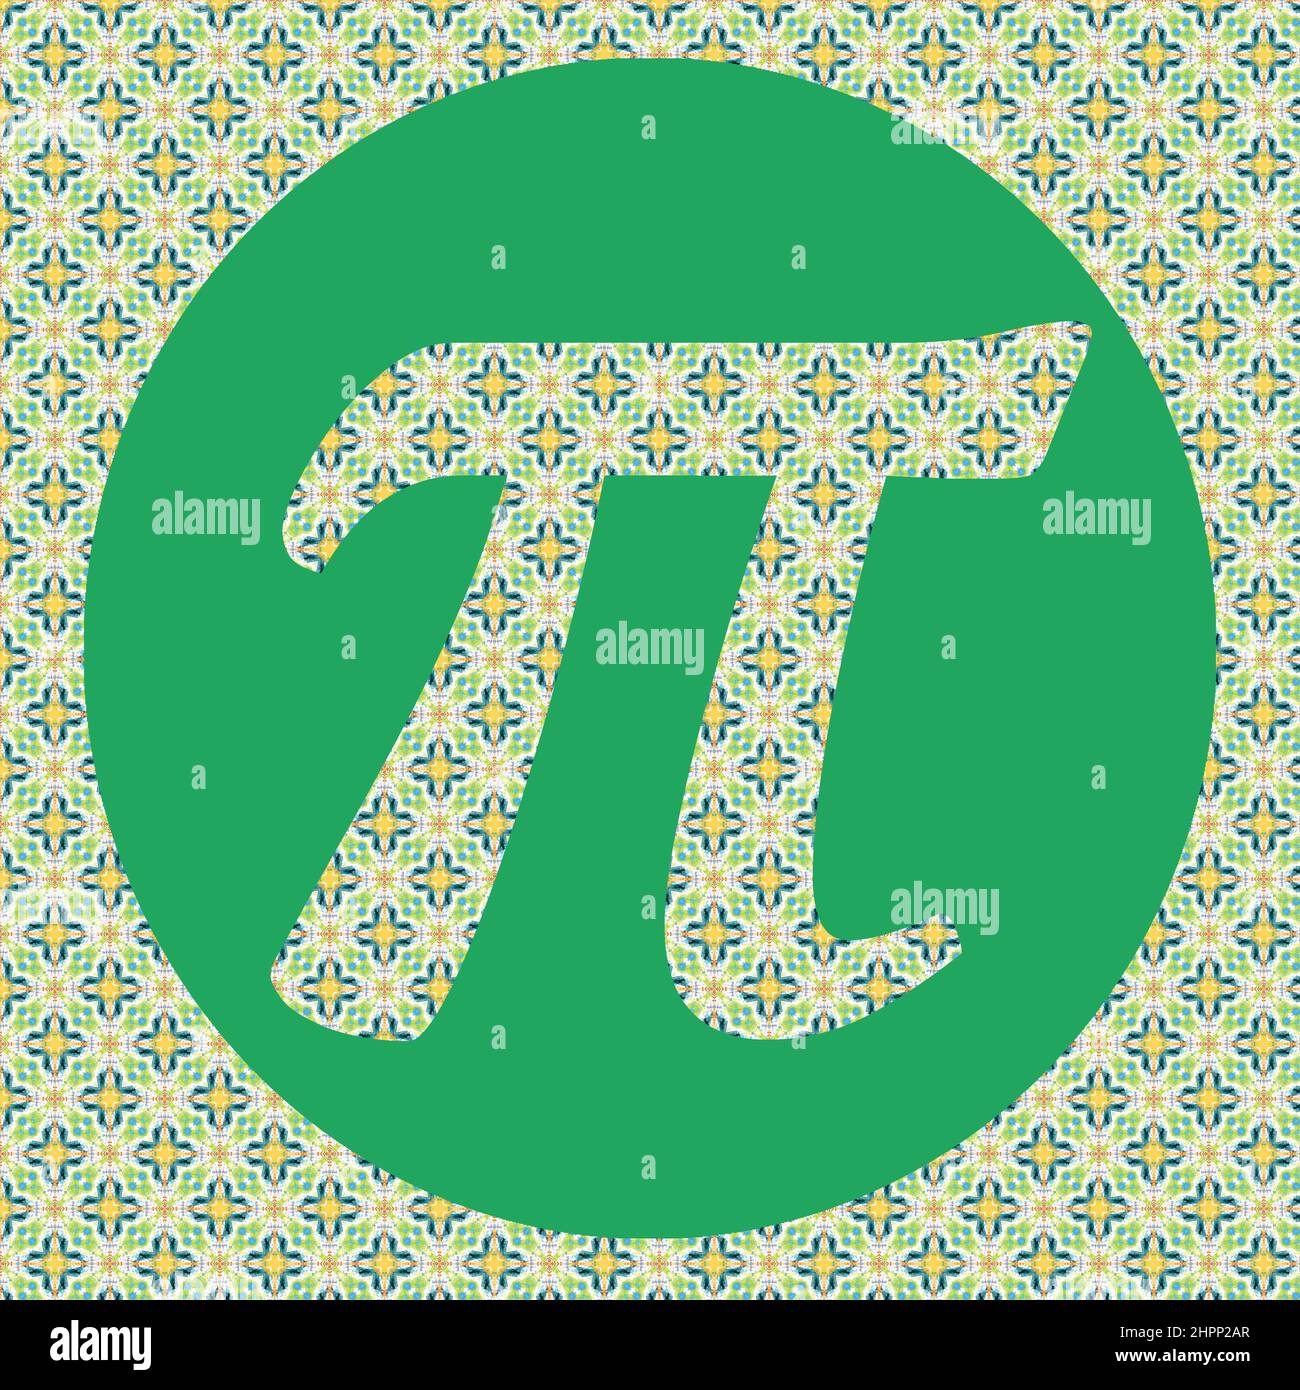 Pi day holiday Greek letter pi inside a green circle with pretty yellow and green pattern. March 14 is Pi day since pi equals 3.14 π is the ratio of t Stock Photo